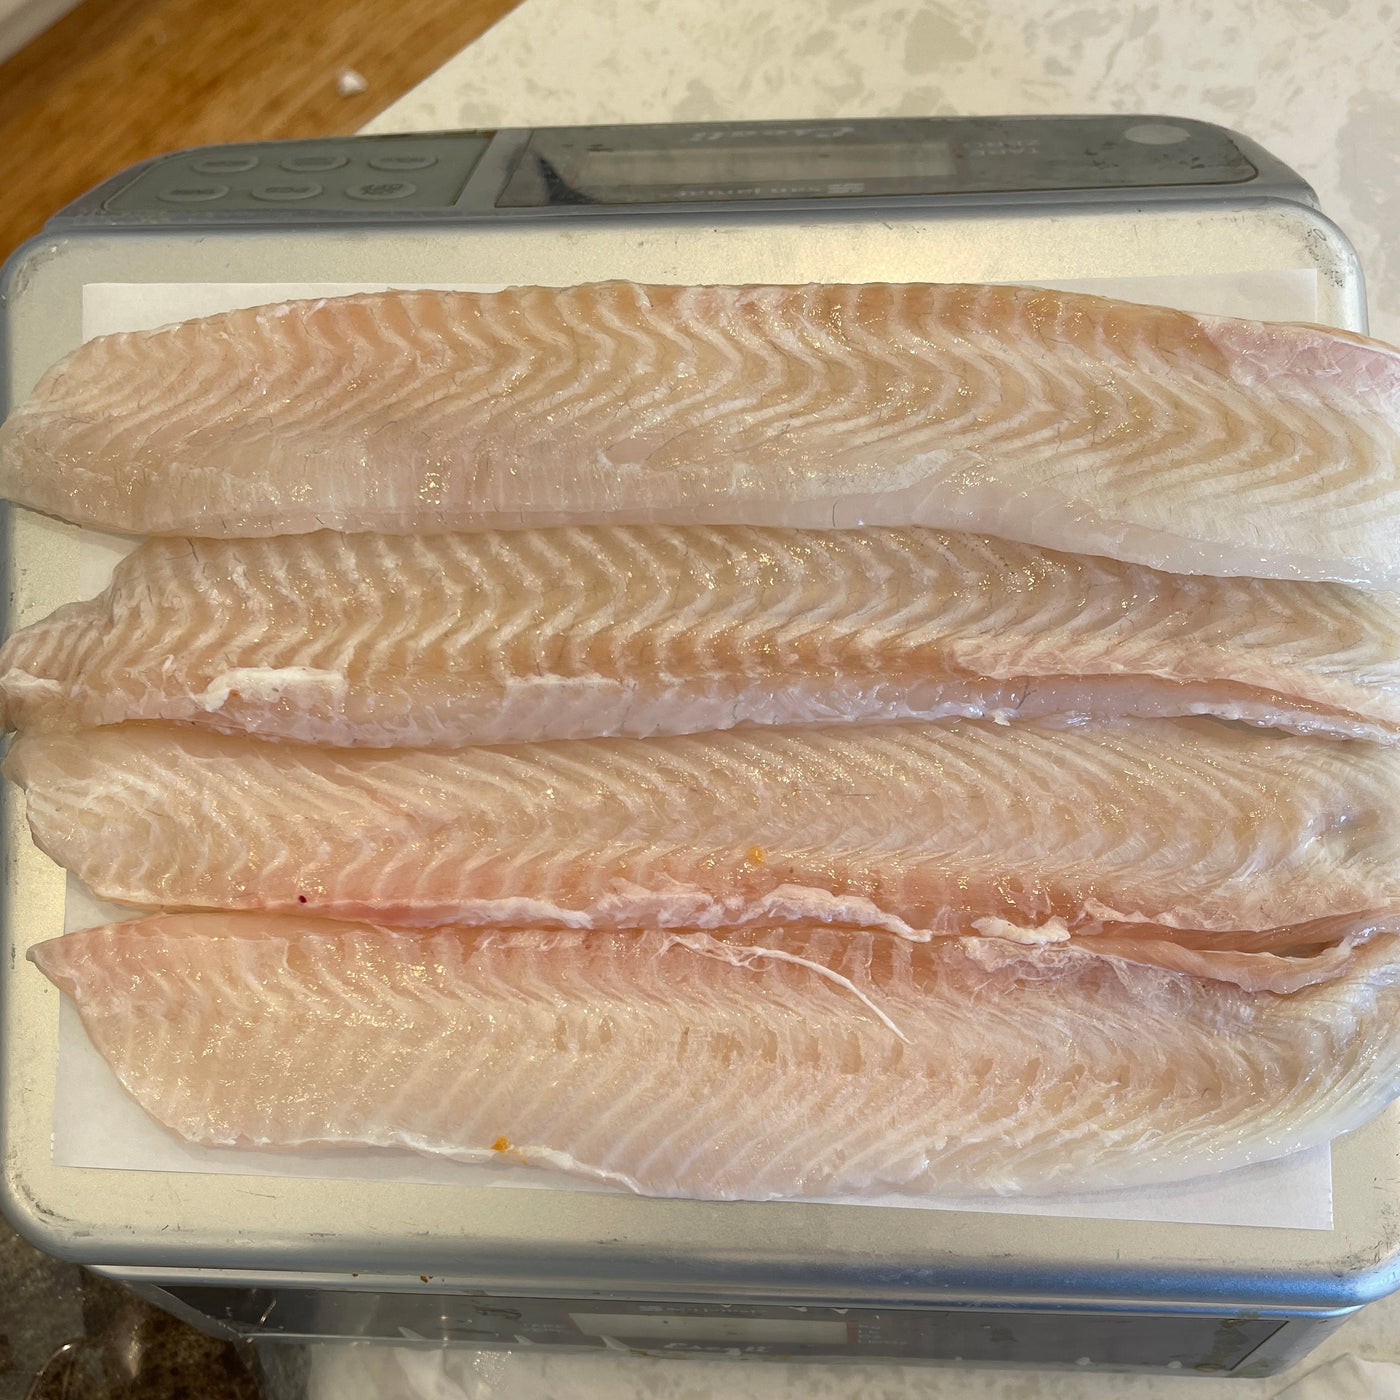 Dover Sole - Fillets (Wild)